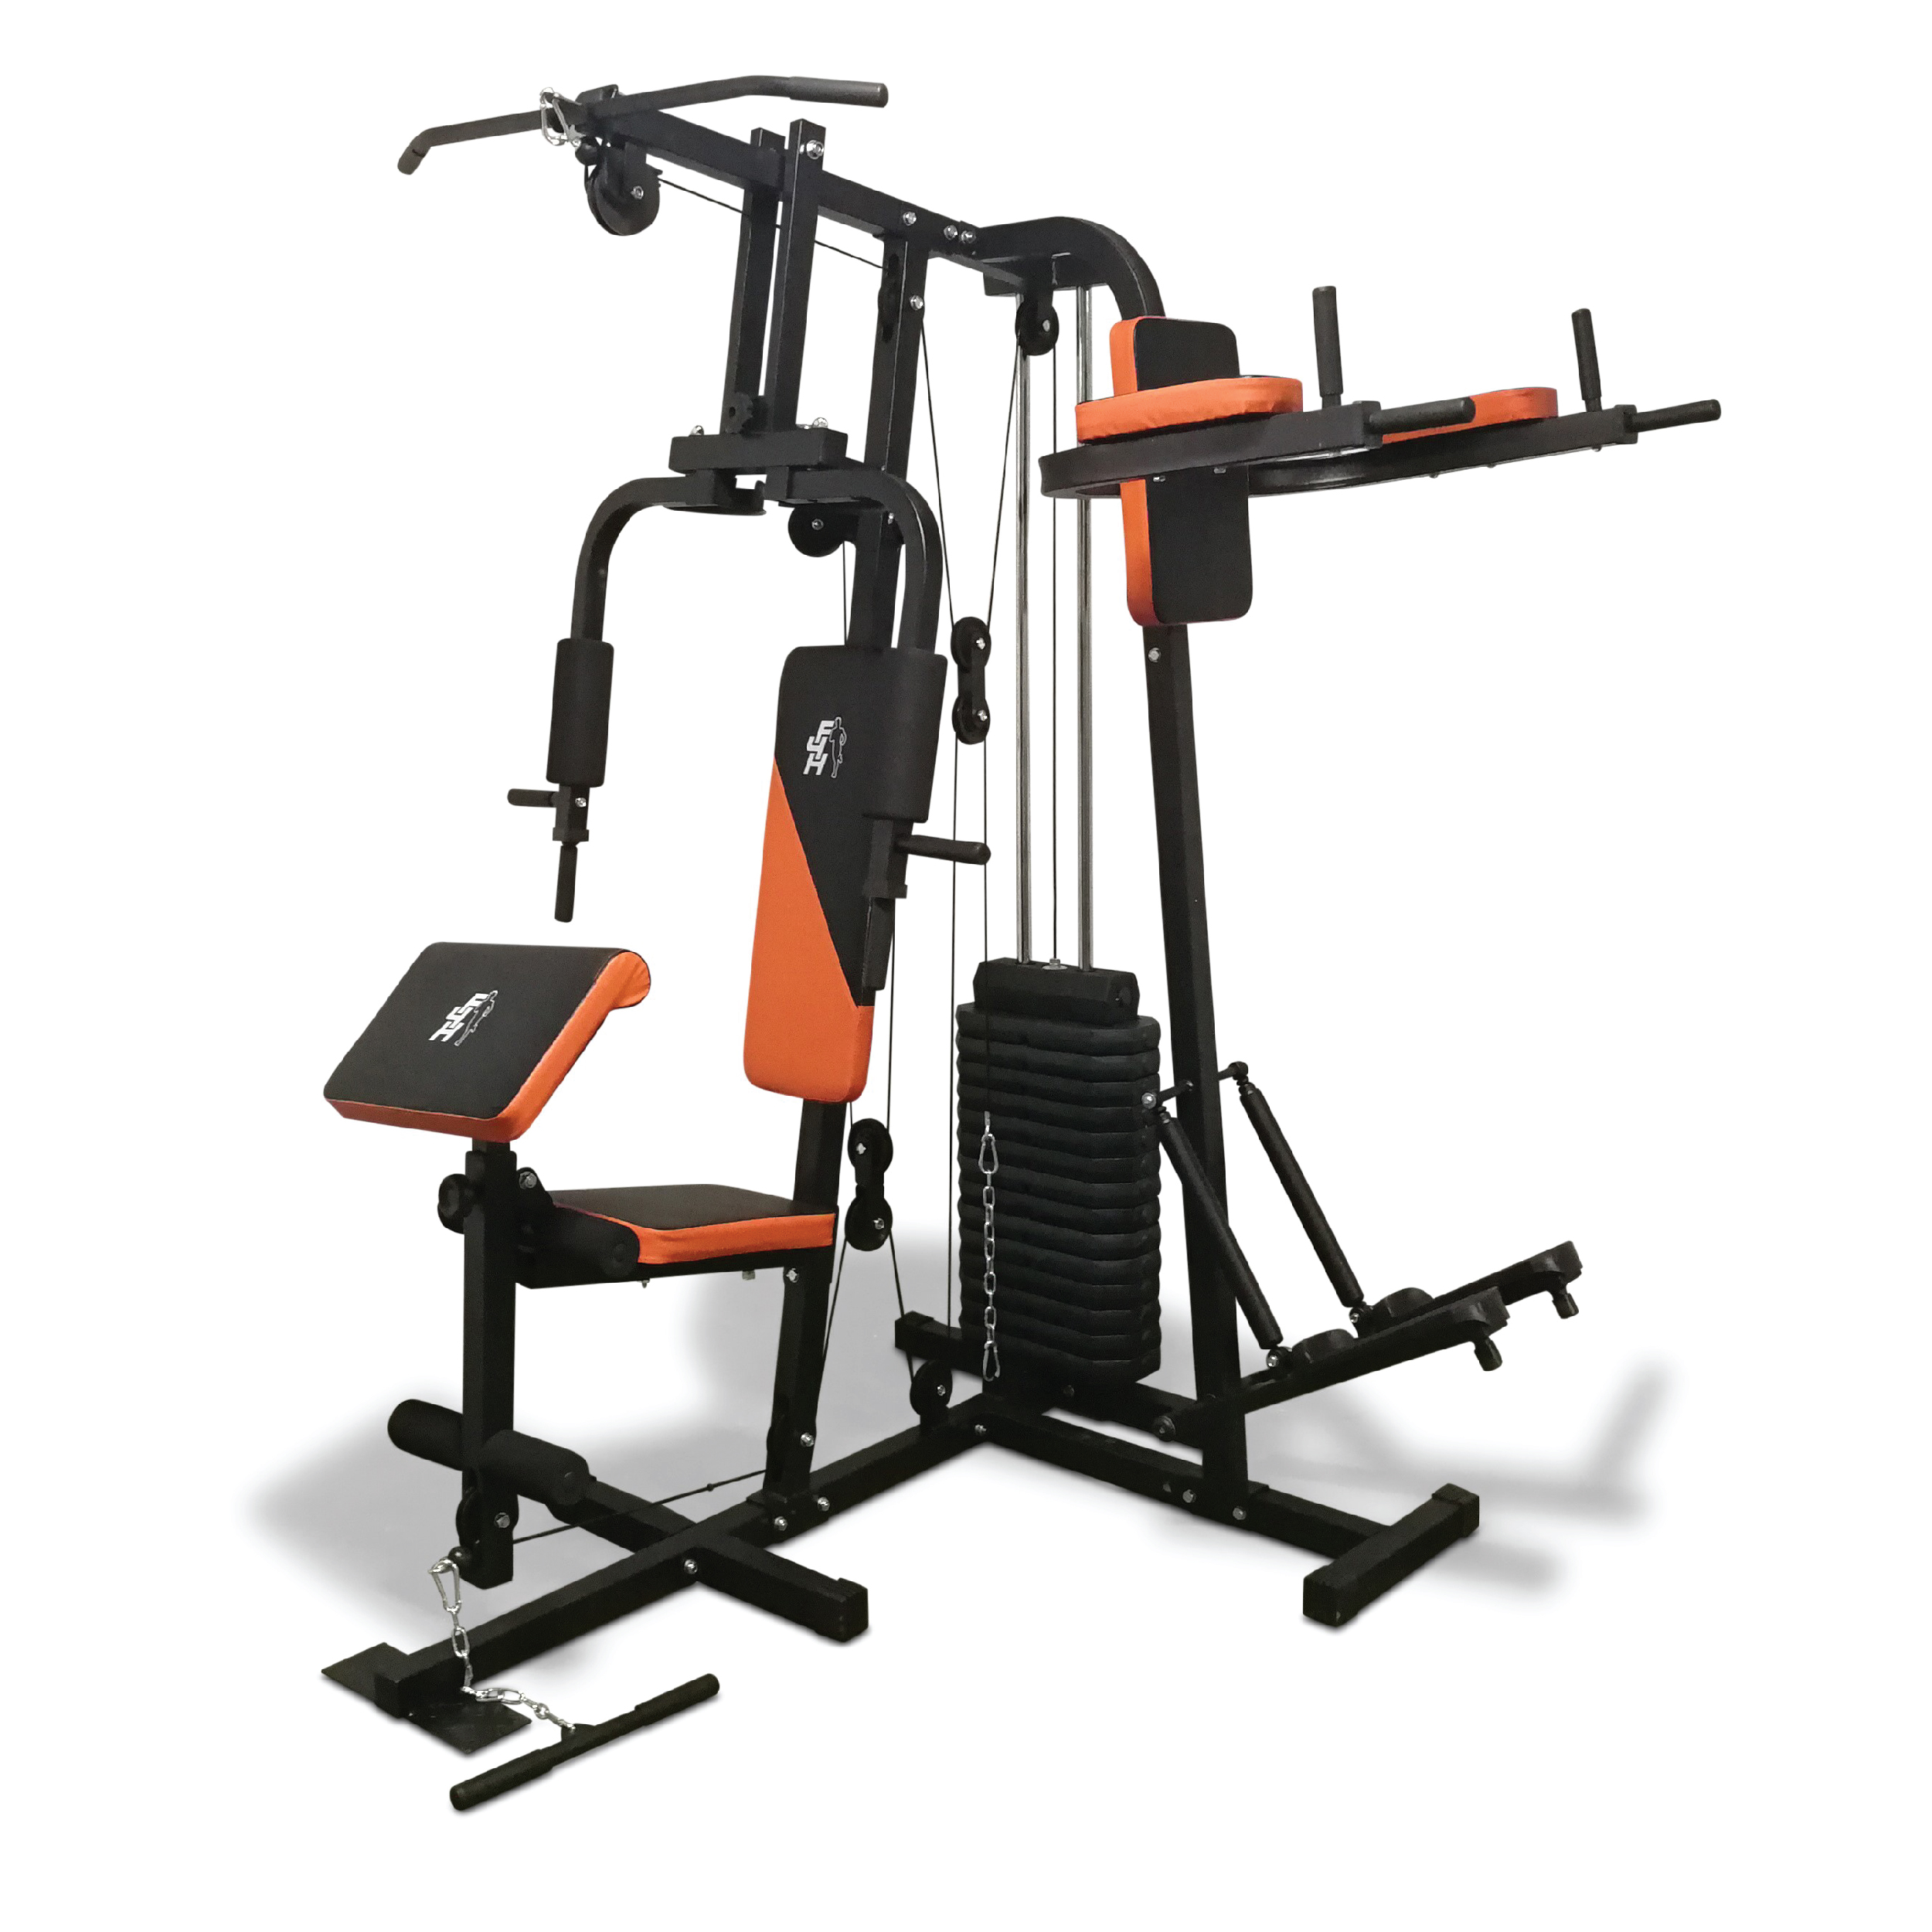 Home Multi Gym Workout Equipment Adjustable & Easily Assembled | Fit4home  TF-7002 Orange